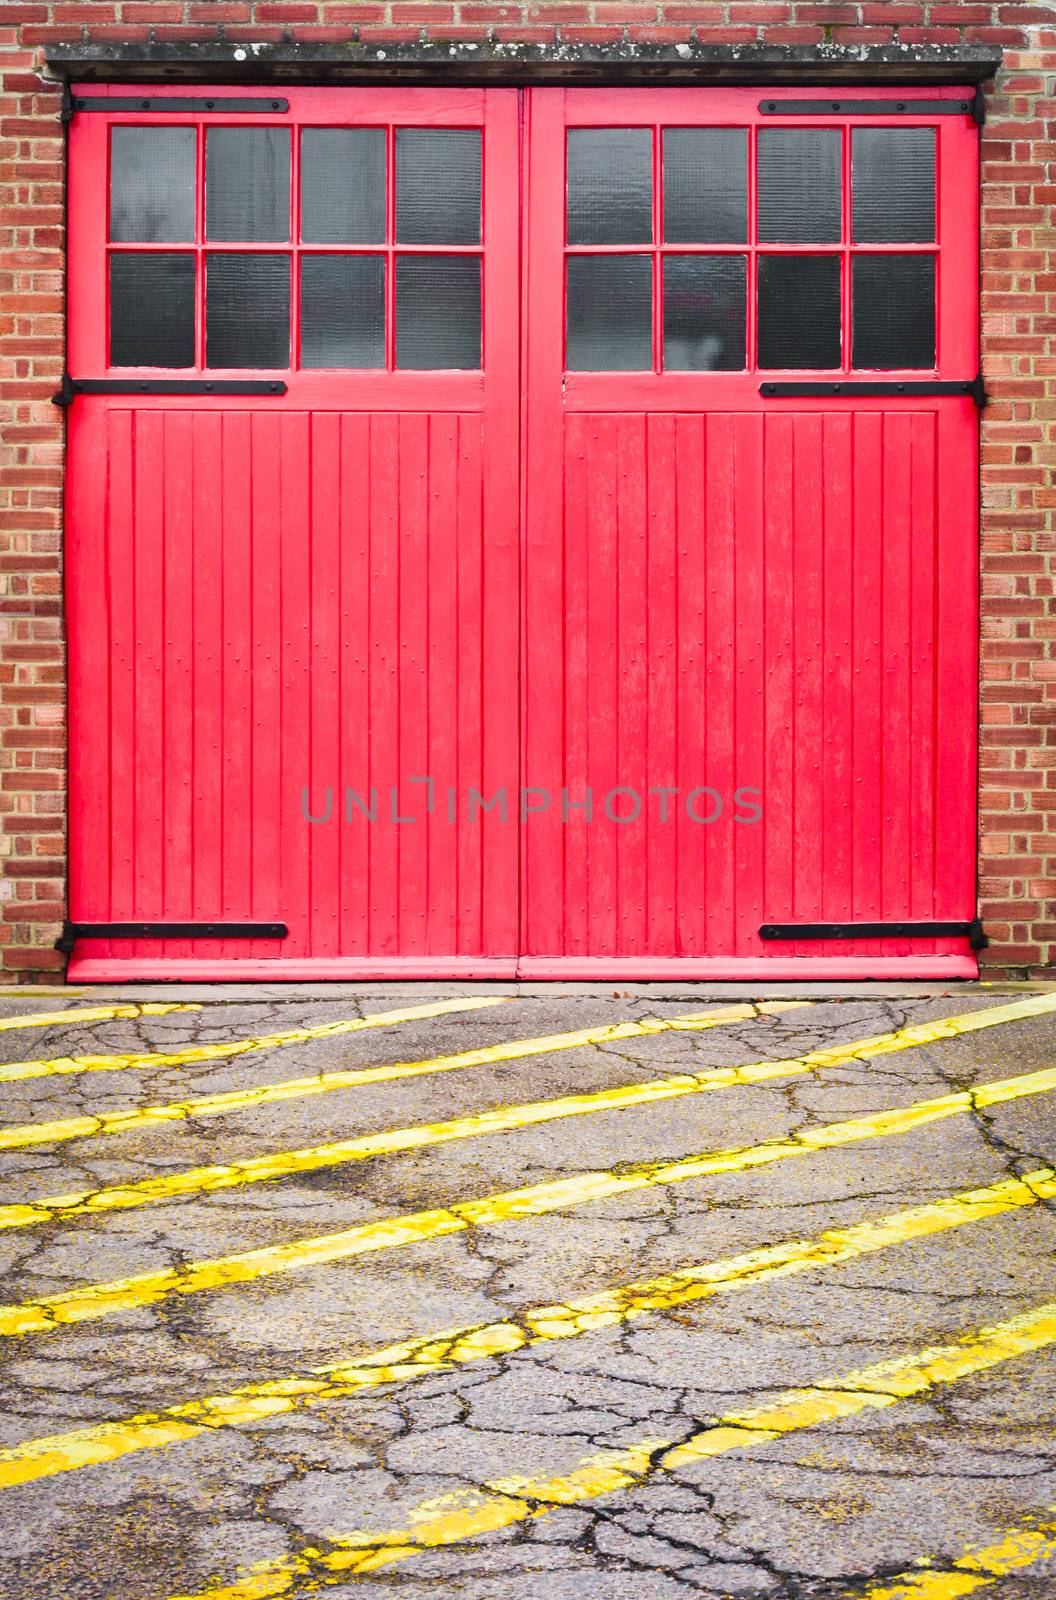 Red fire station door with yellow lines